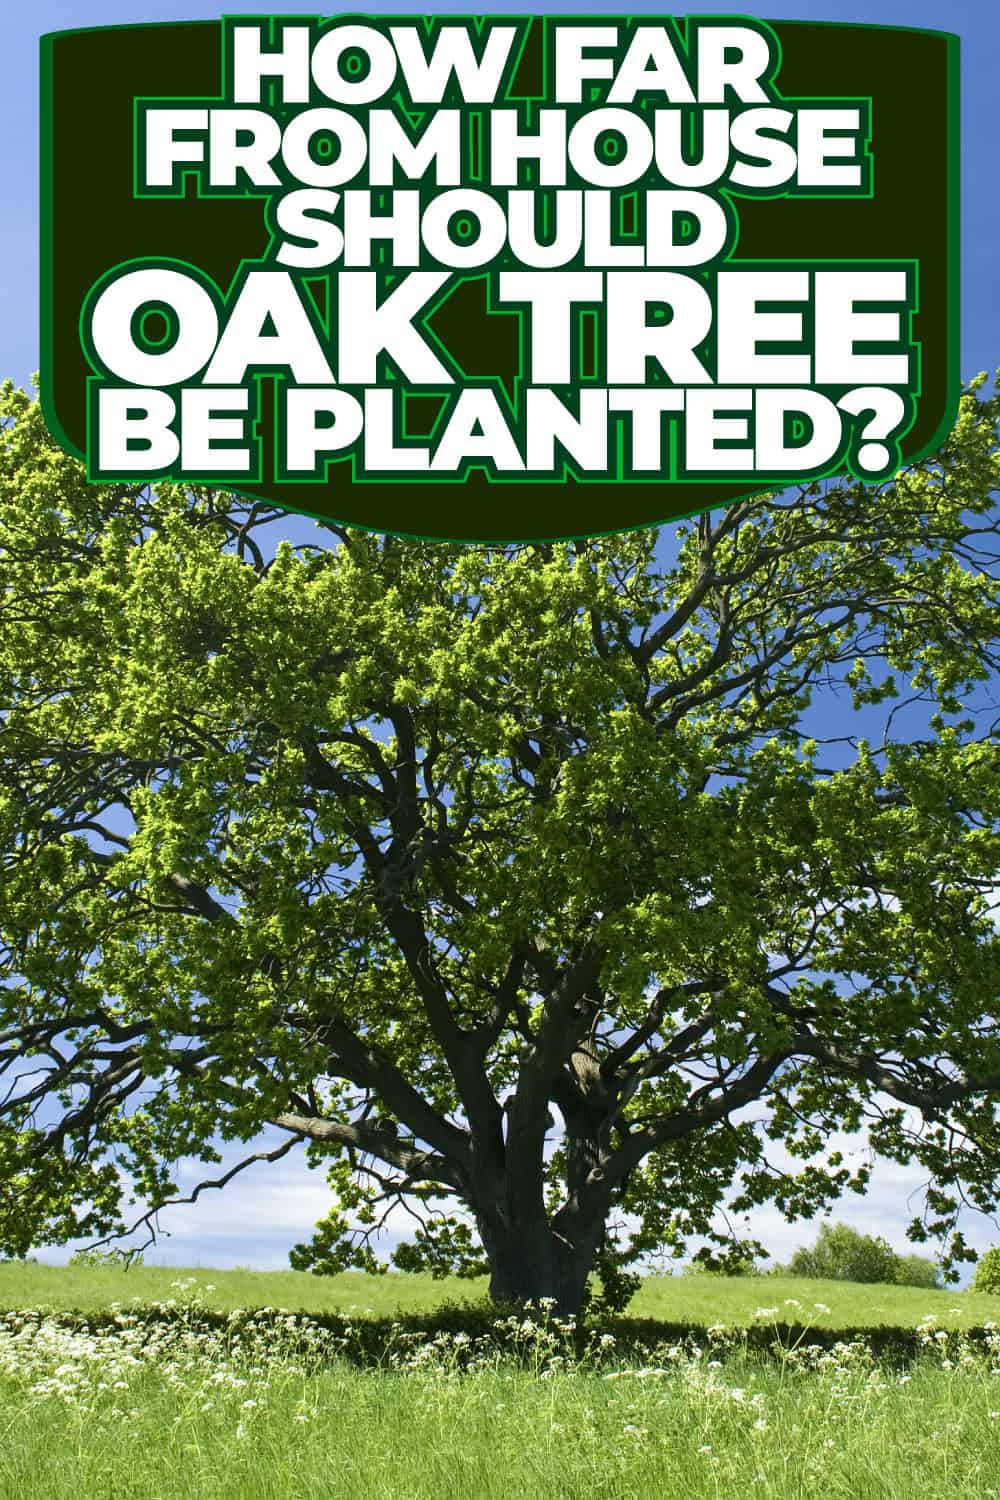 How Far From House Should Oak Tree Be Planted?